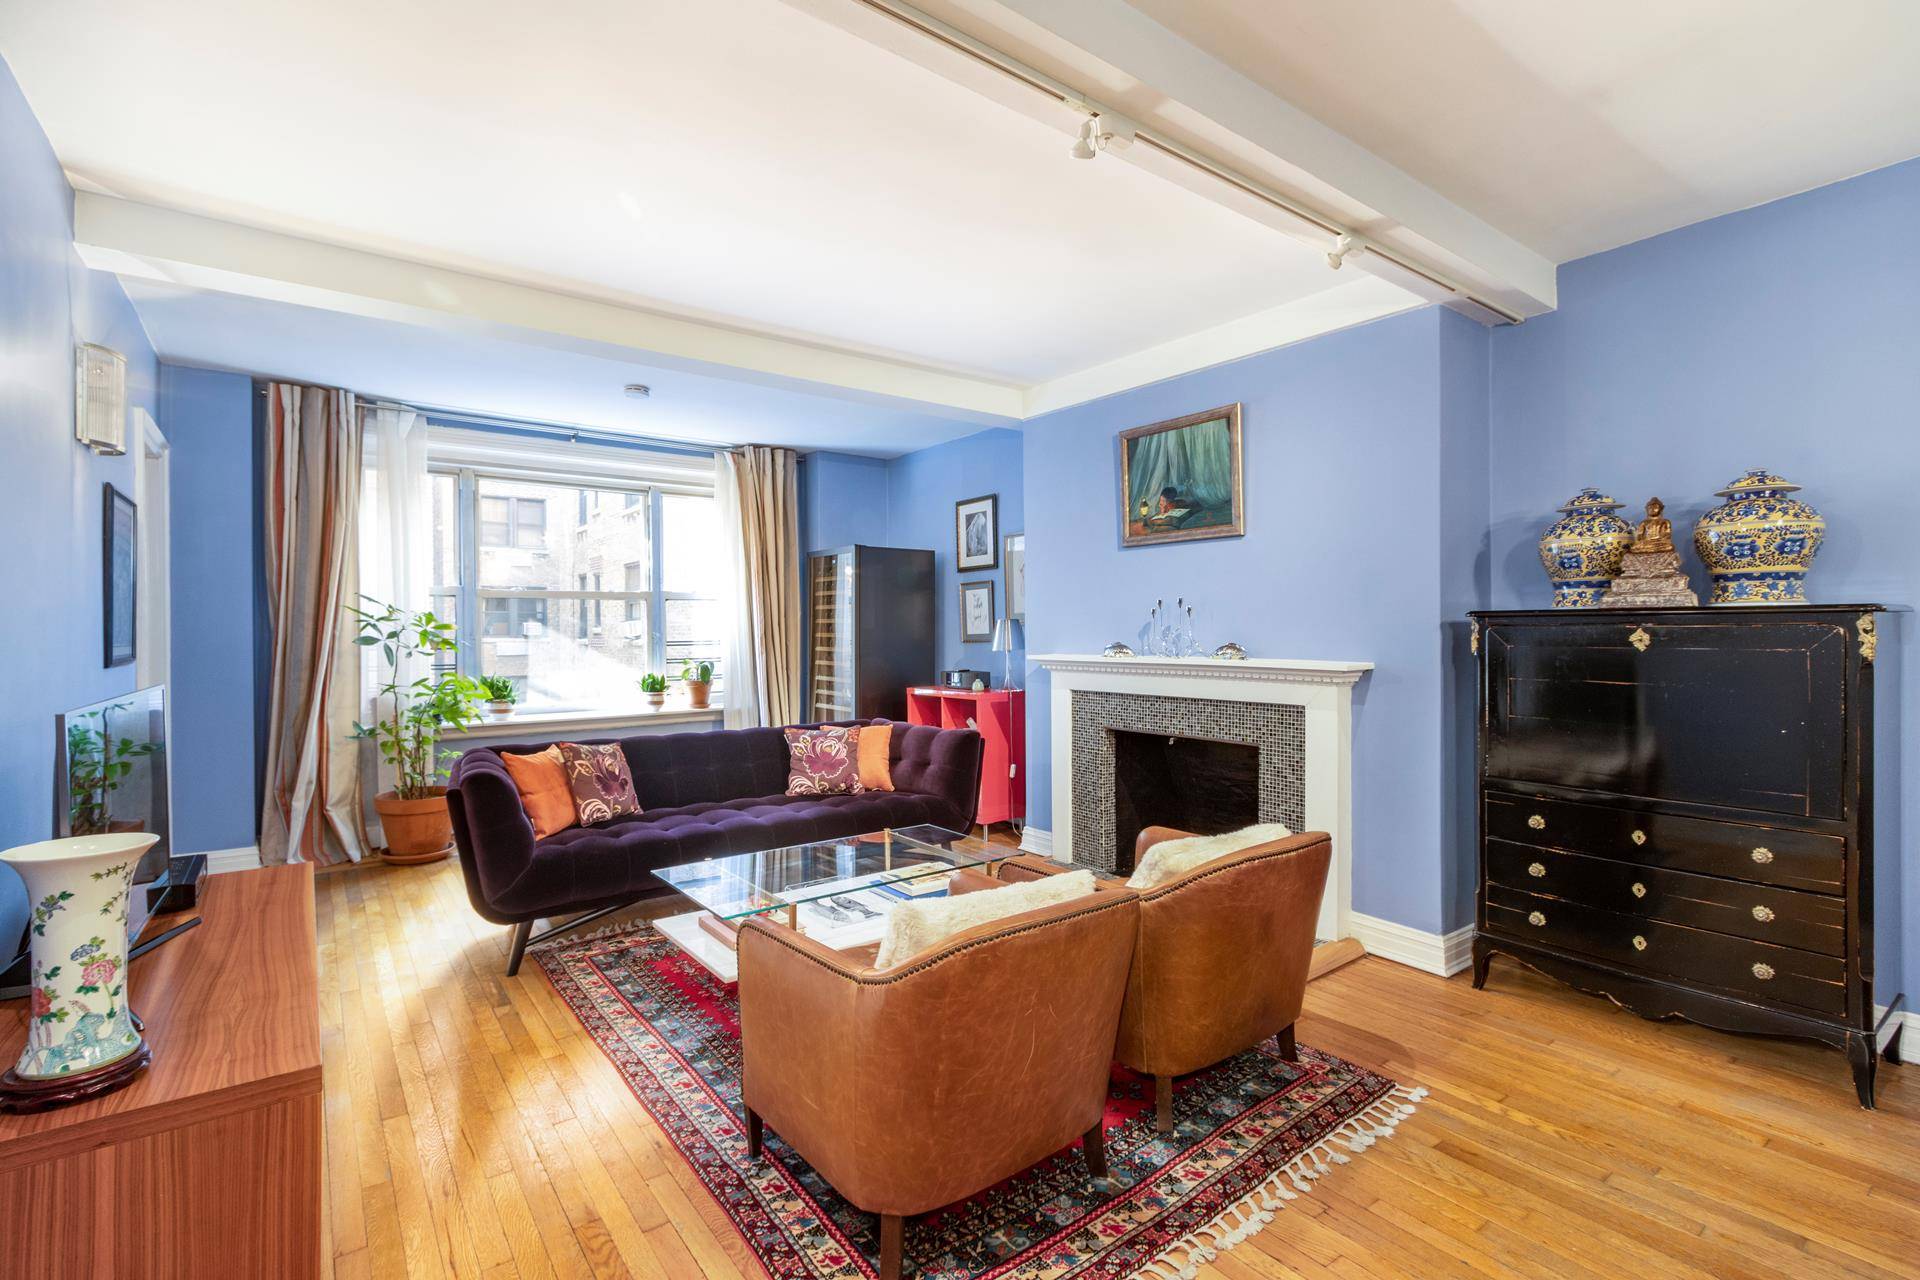 Beekman Beauty. This spacious one bedroom, one bath apartment is located in a beautiful full service, pre war co op on a lovely and quiet cul de sac in the ...